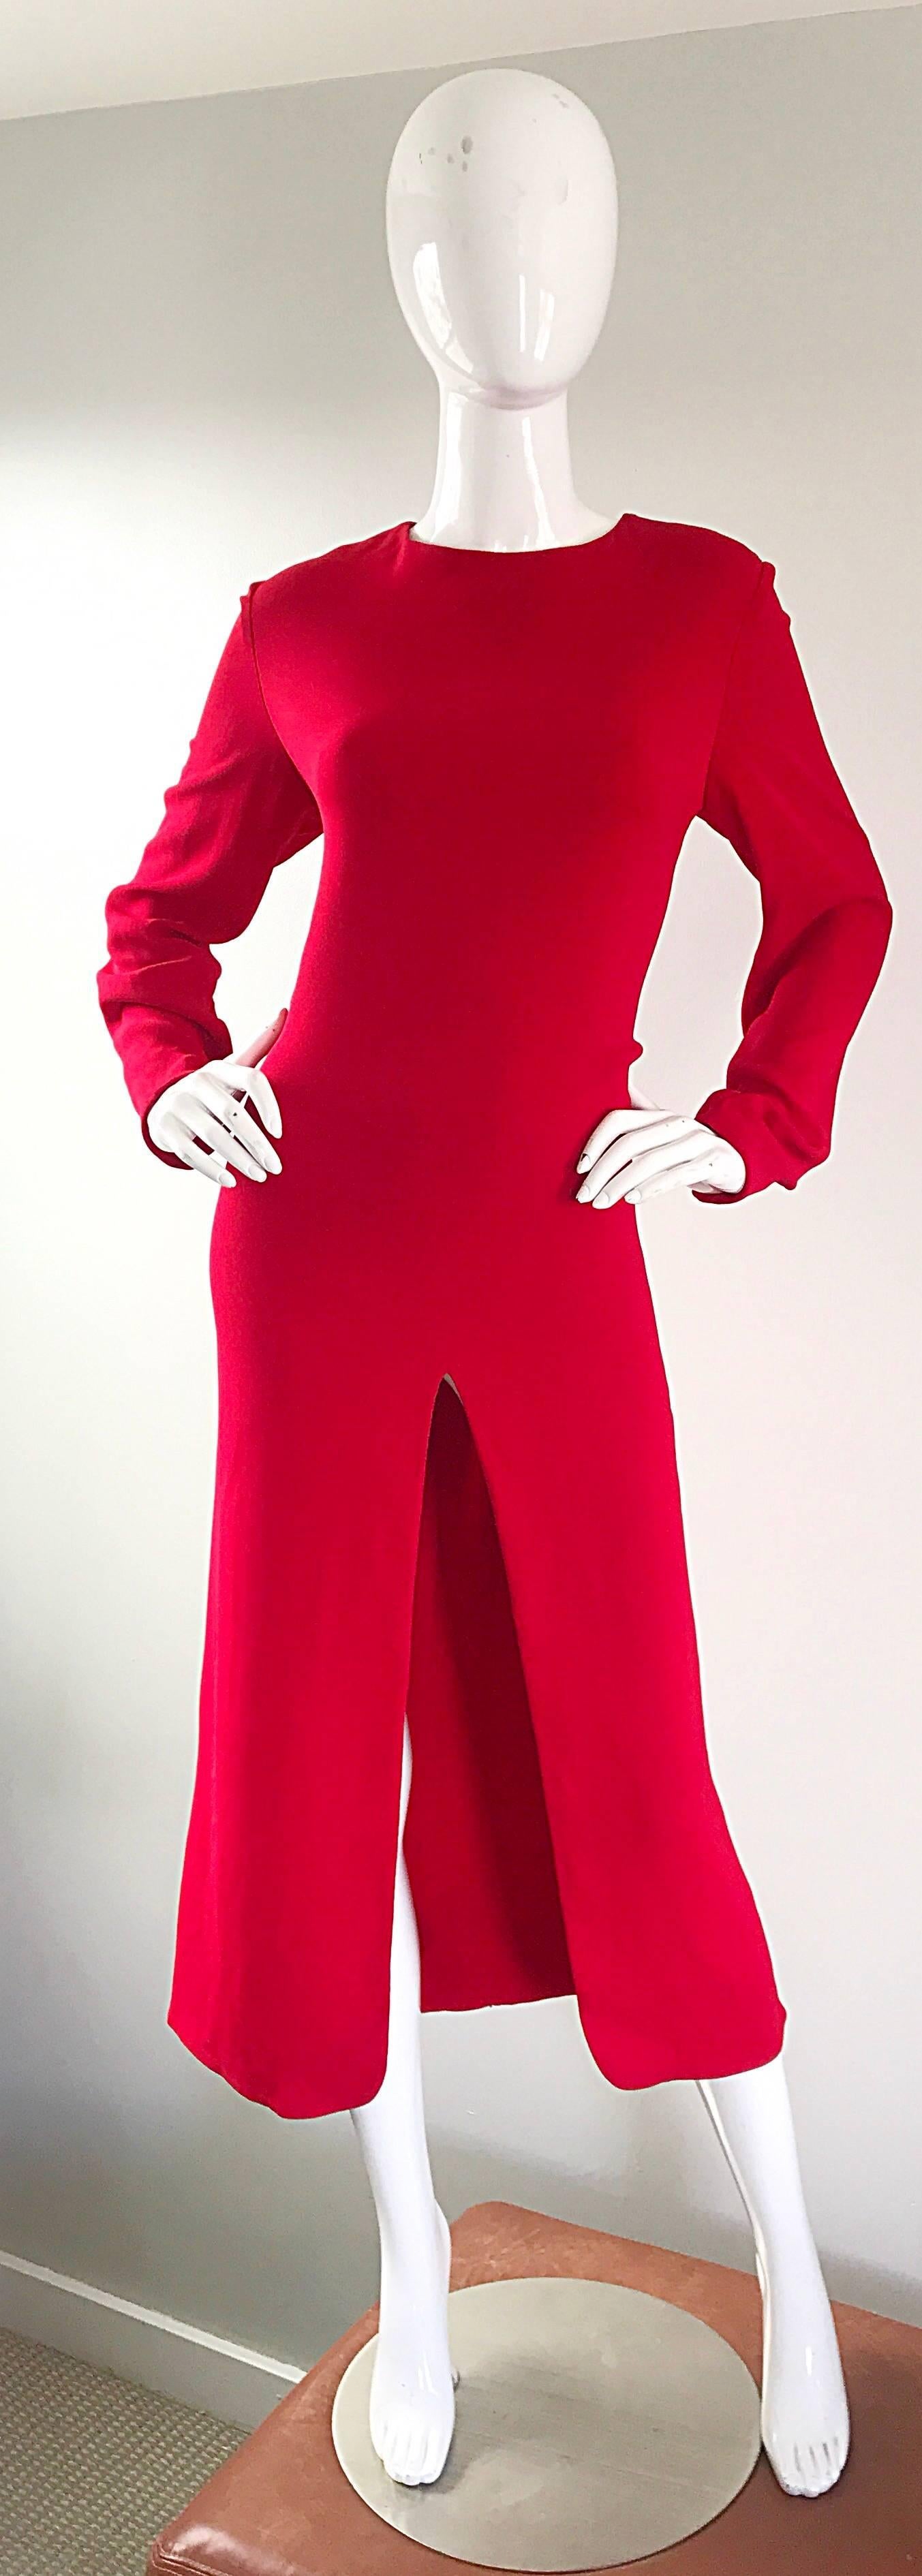 Gorgeous vintage 90s BADGLEY MISCHKA lipstick red long sleeve jersey evening midi dress! Wonderful flattering fit, with a slightly daring slit up the front center. Comfortable rayon jersey blend stretches to fit. Hidden zipper up th eback with